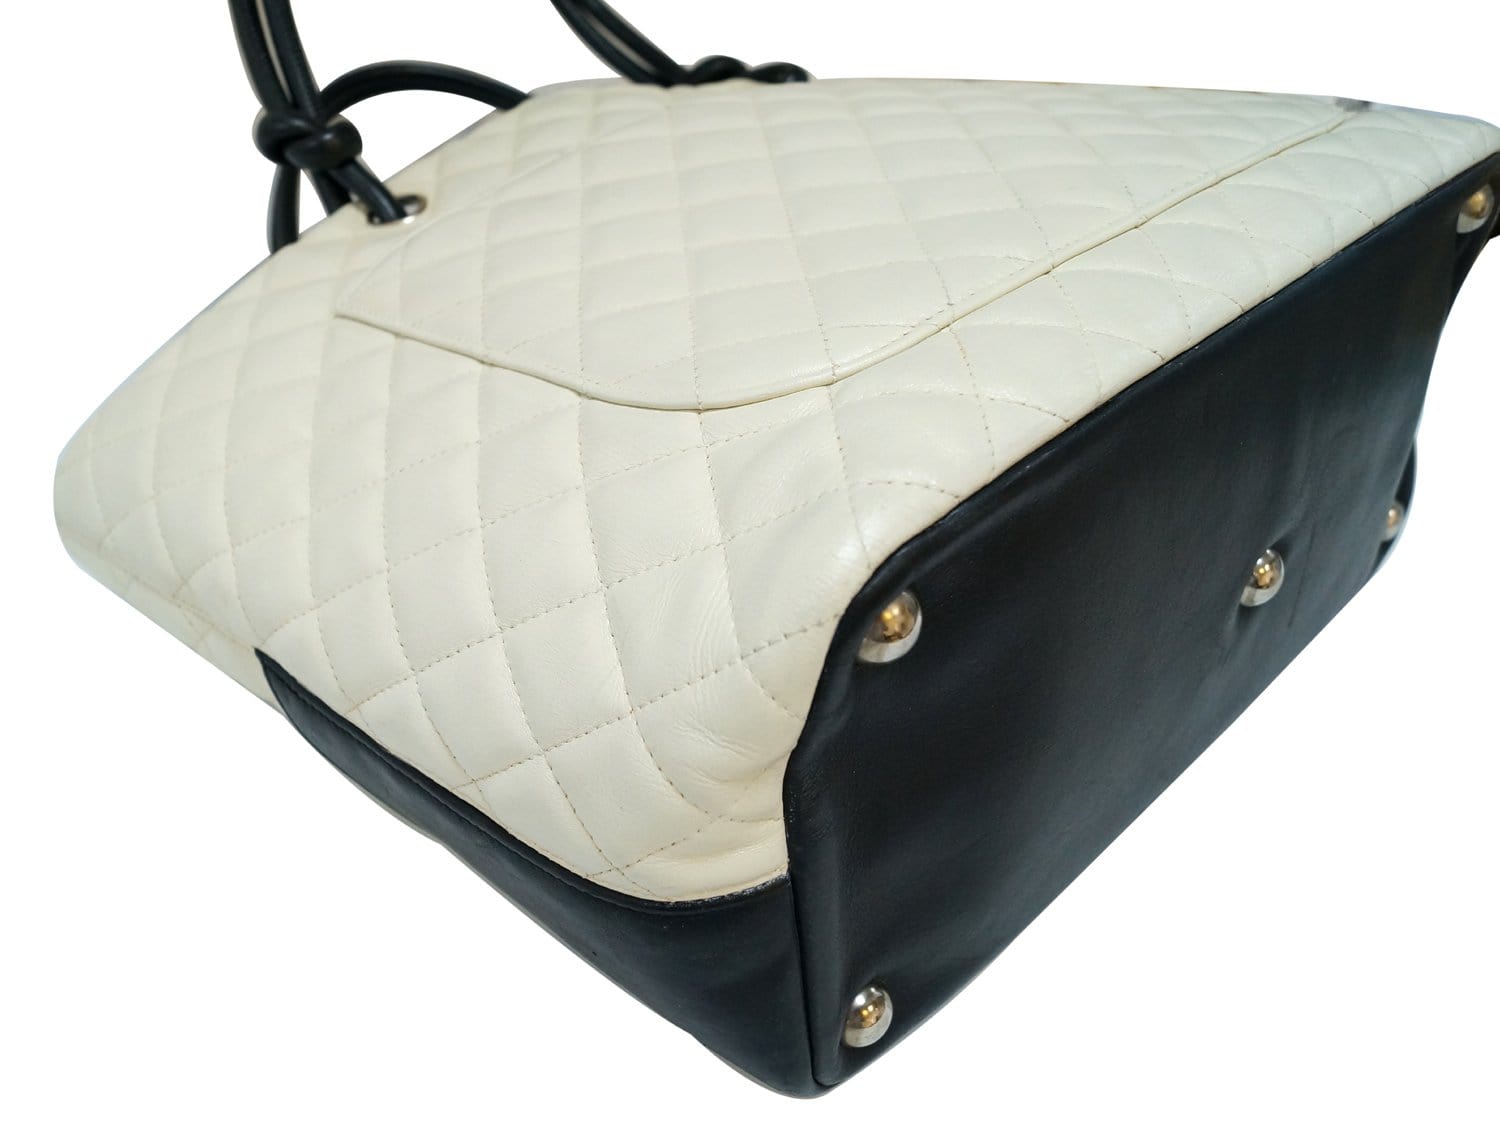 CHANEL White Quilted Leather Ligne Cambon Tote Bag